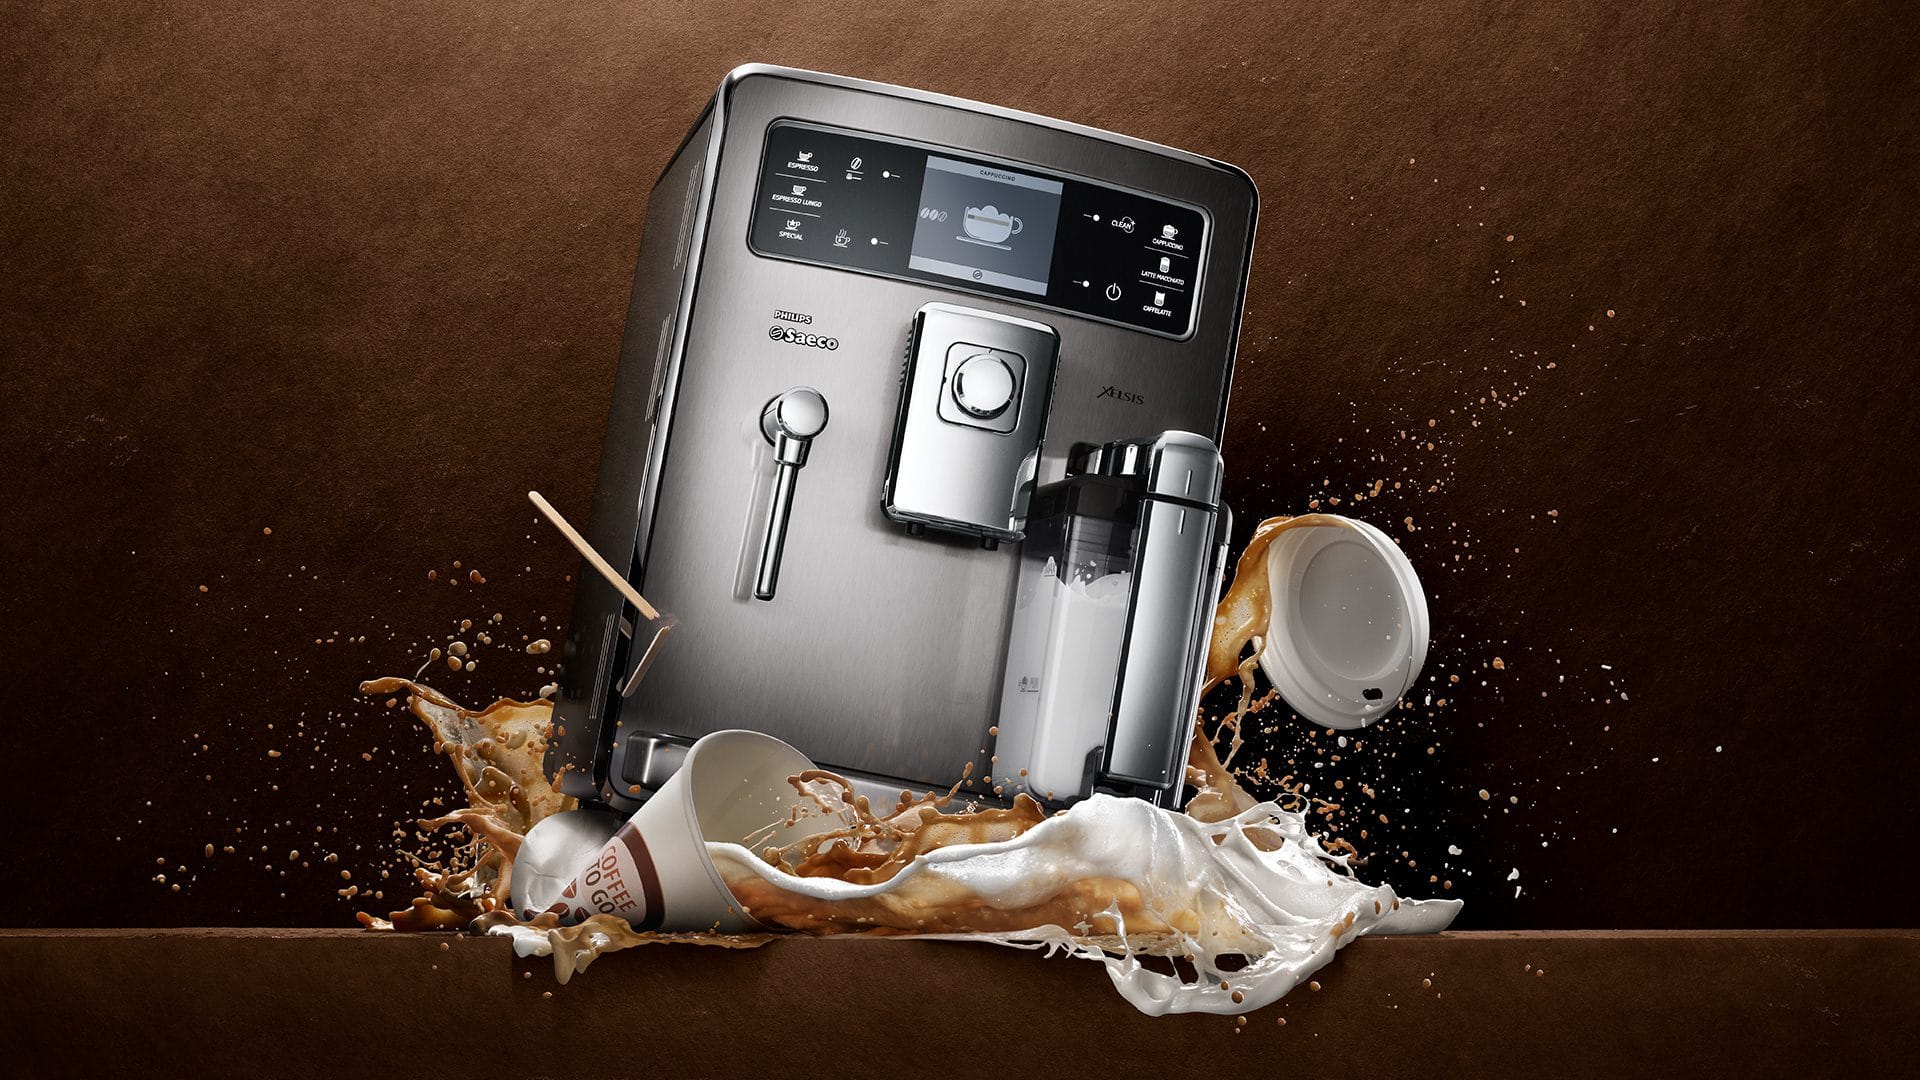 Coffee Maker Wattage Consumption Based on Popular Brands